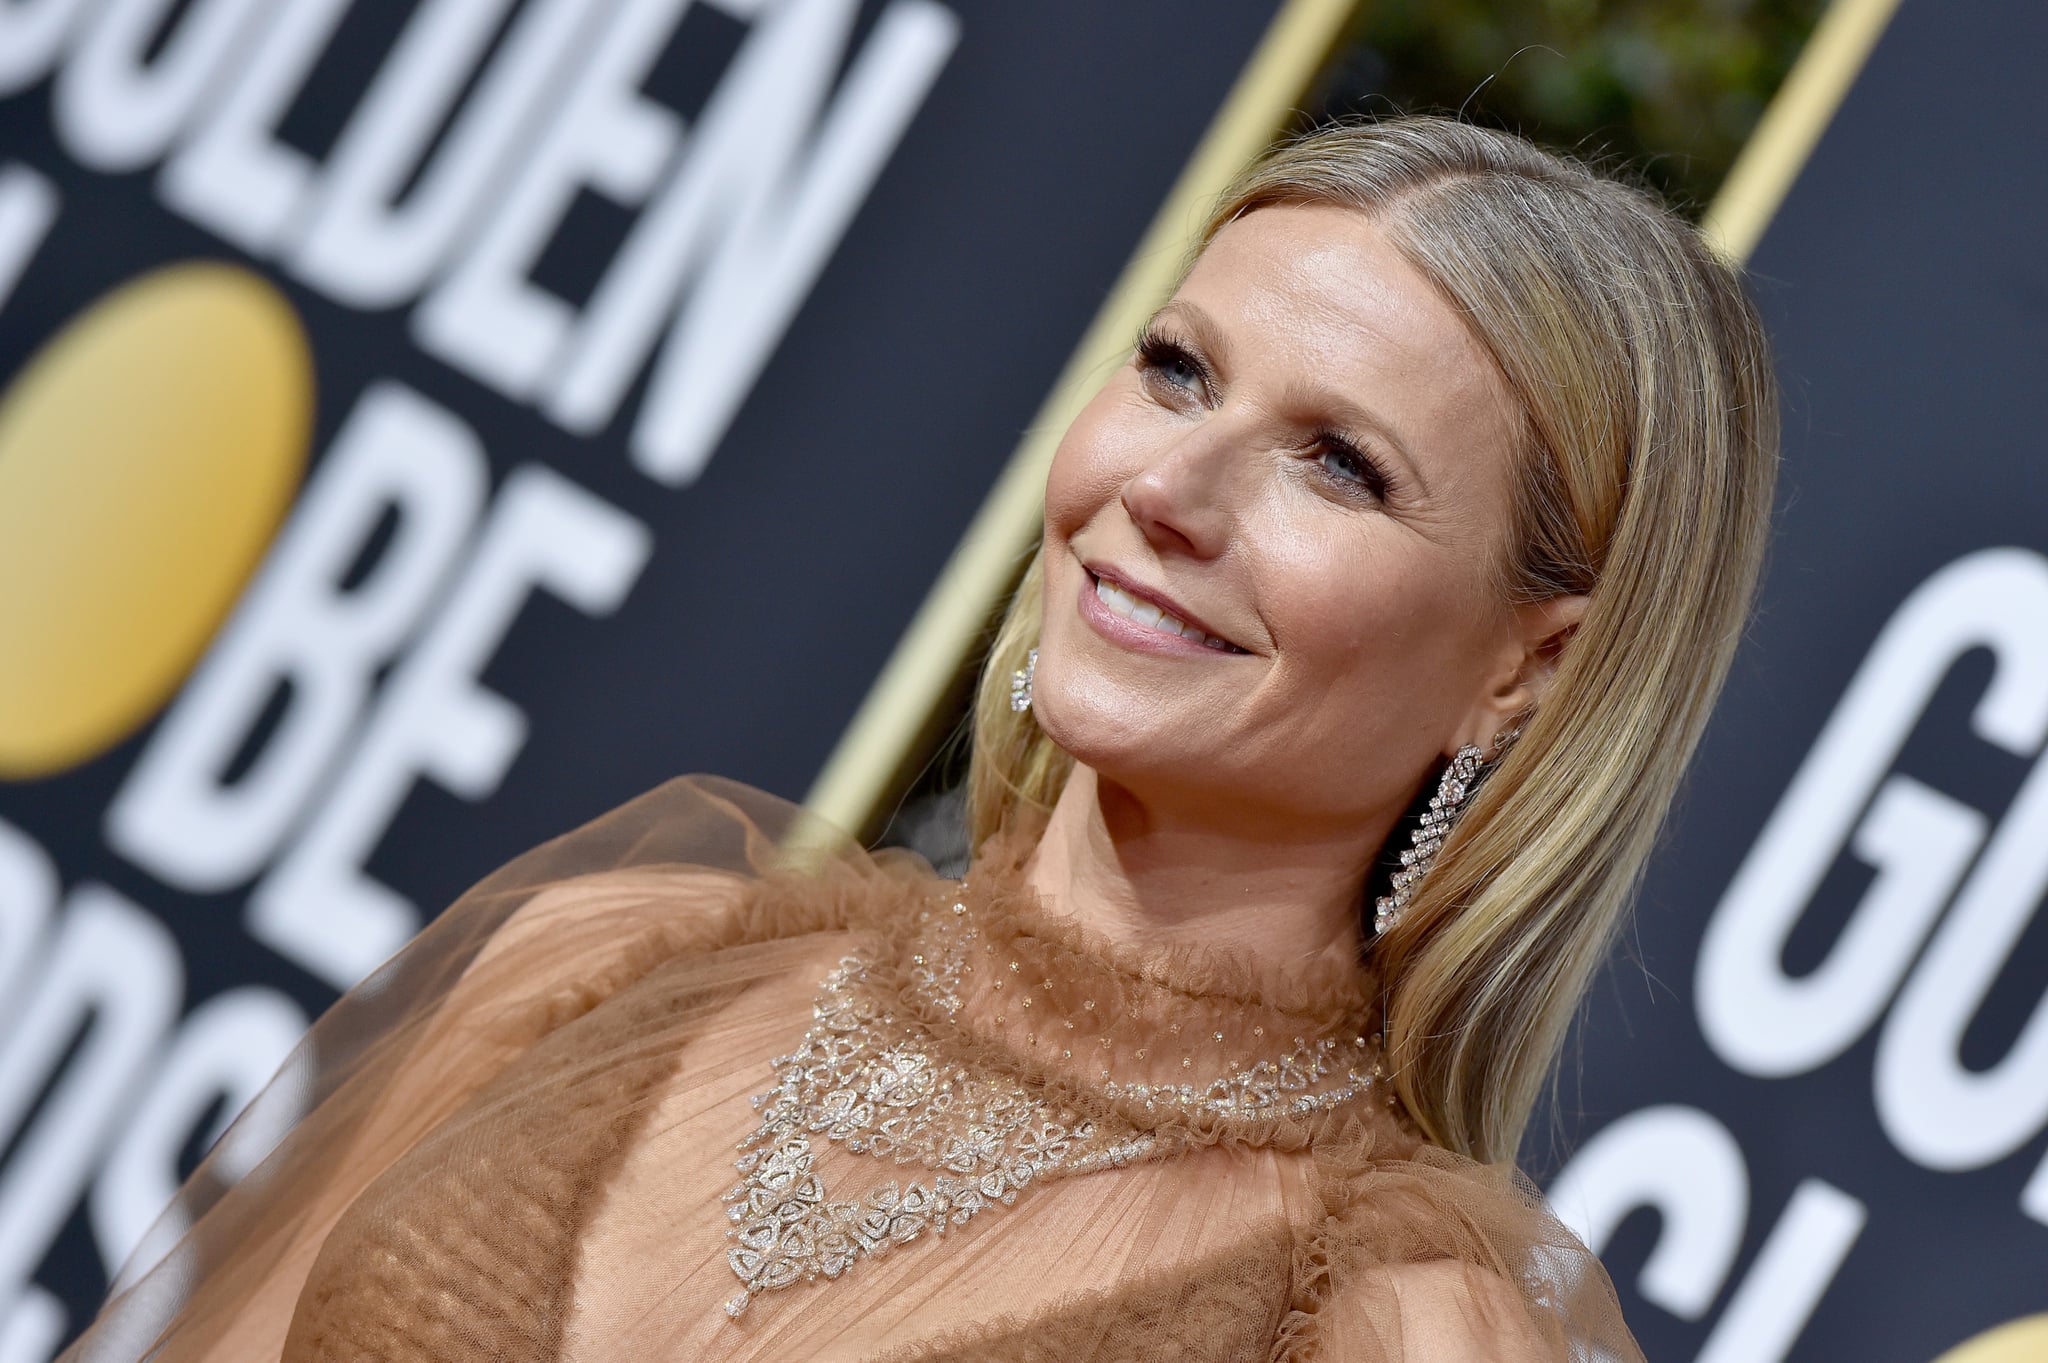 BEVERLY HILLS, CALIFORNIA - JANUARY 05: Gwyneth Paltrow attends the 77th Annual Golden Globe Awards at The Beverly Hilton Hotel on January 05, 2020 in Beverly Hills, California. (Photo by Axelle/Bauer-Griffin/FilmMagic)